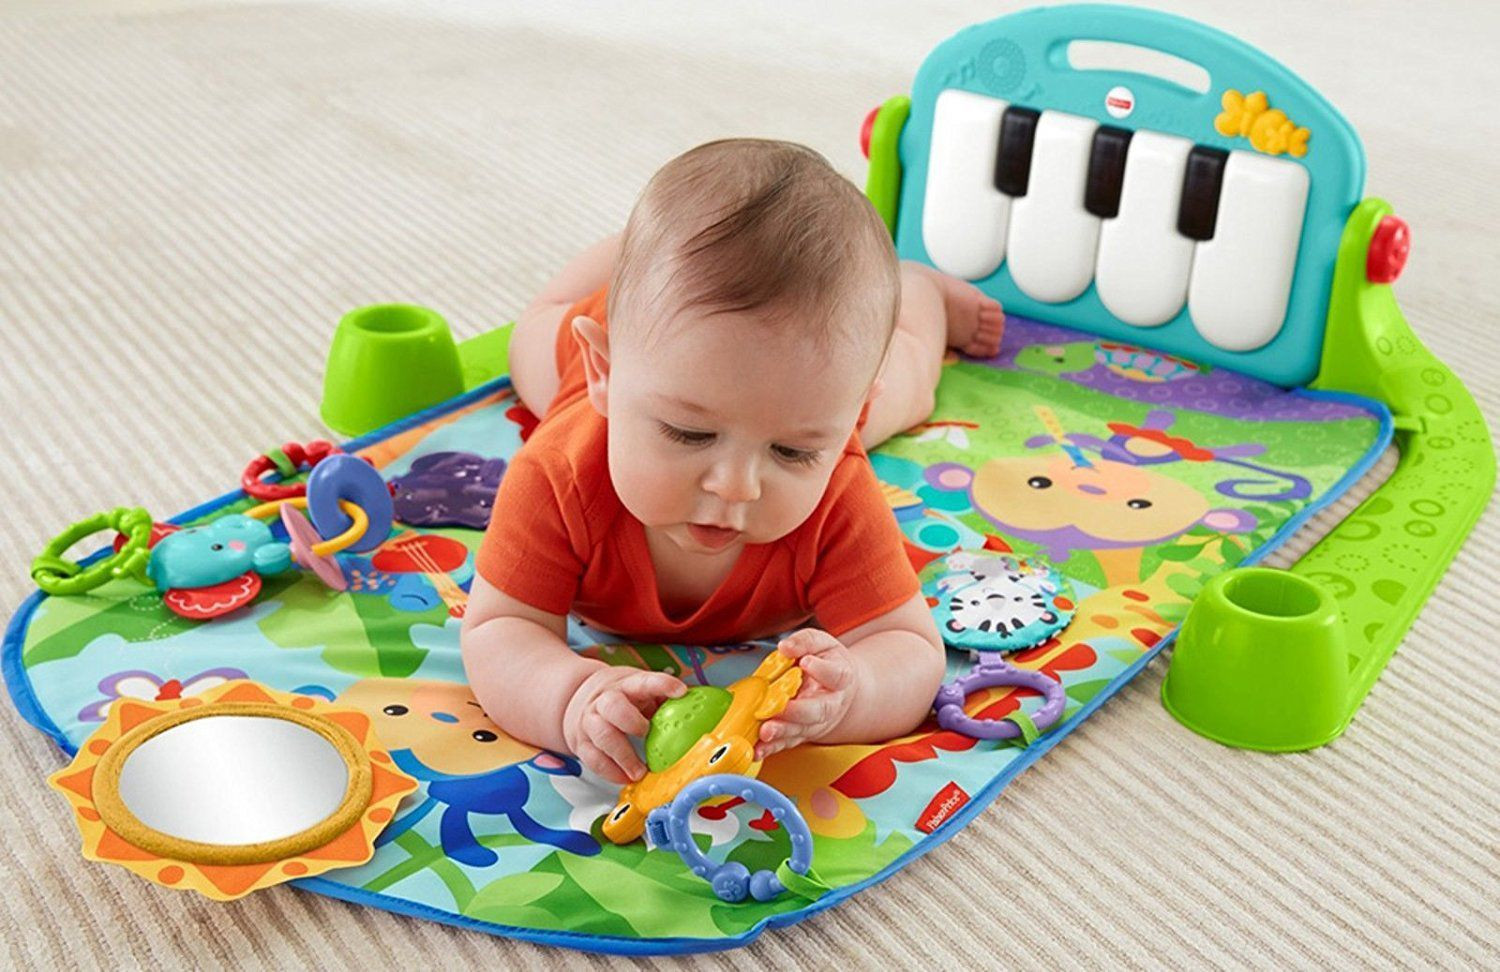 Gifts For 3 Month Old Baby Boy
 The 9 Best Baby Gifts of 2019